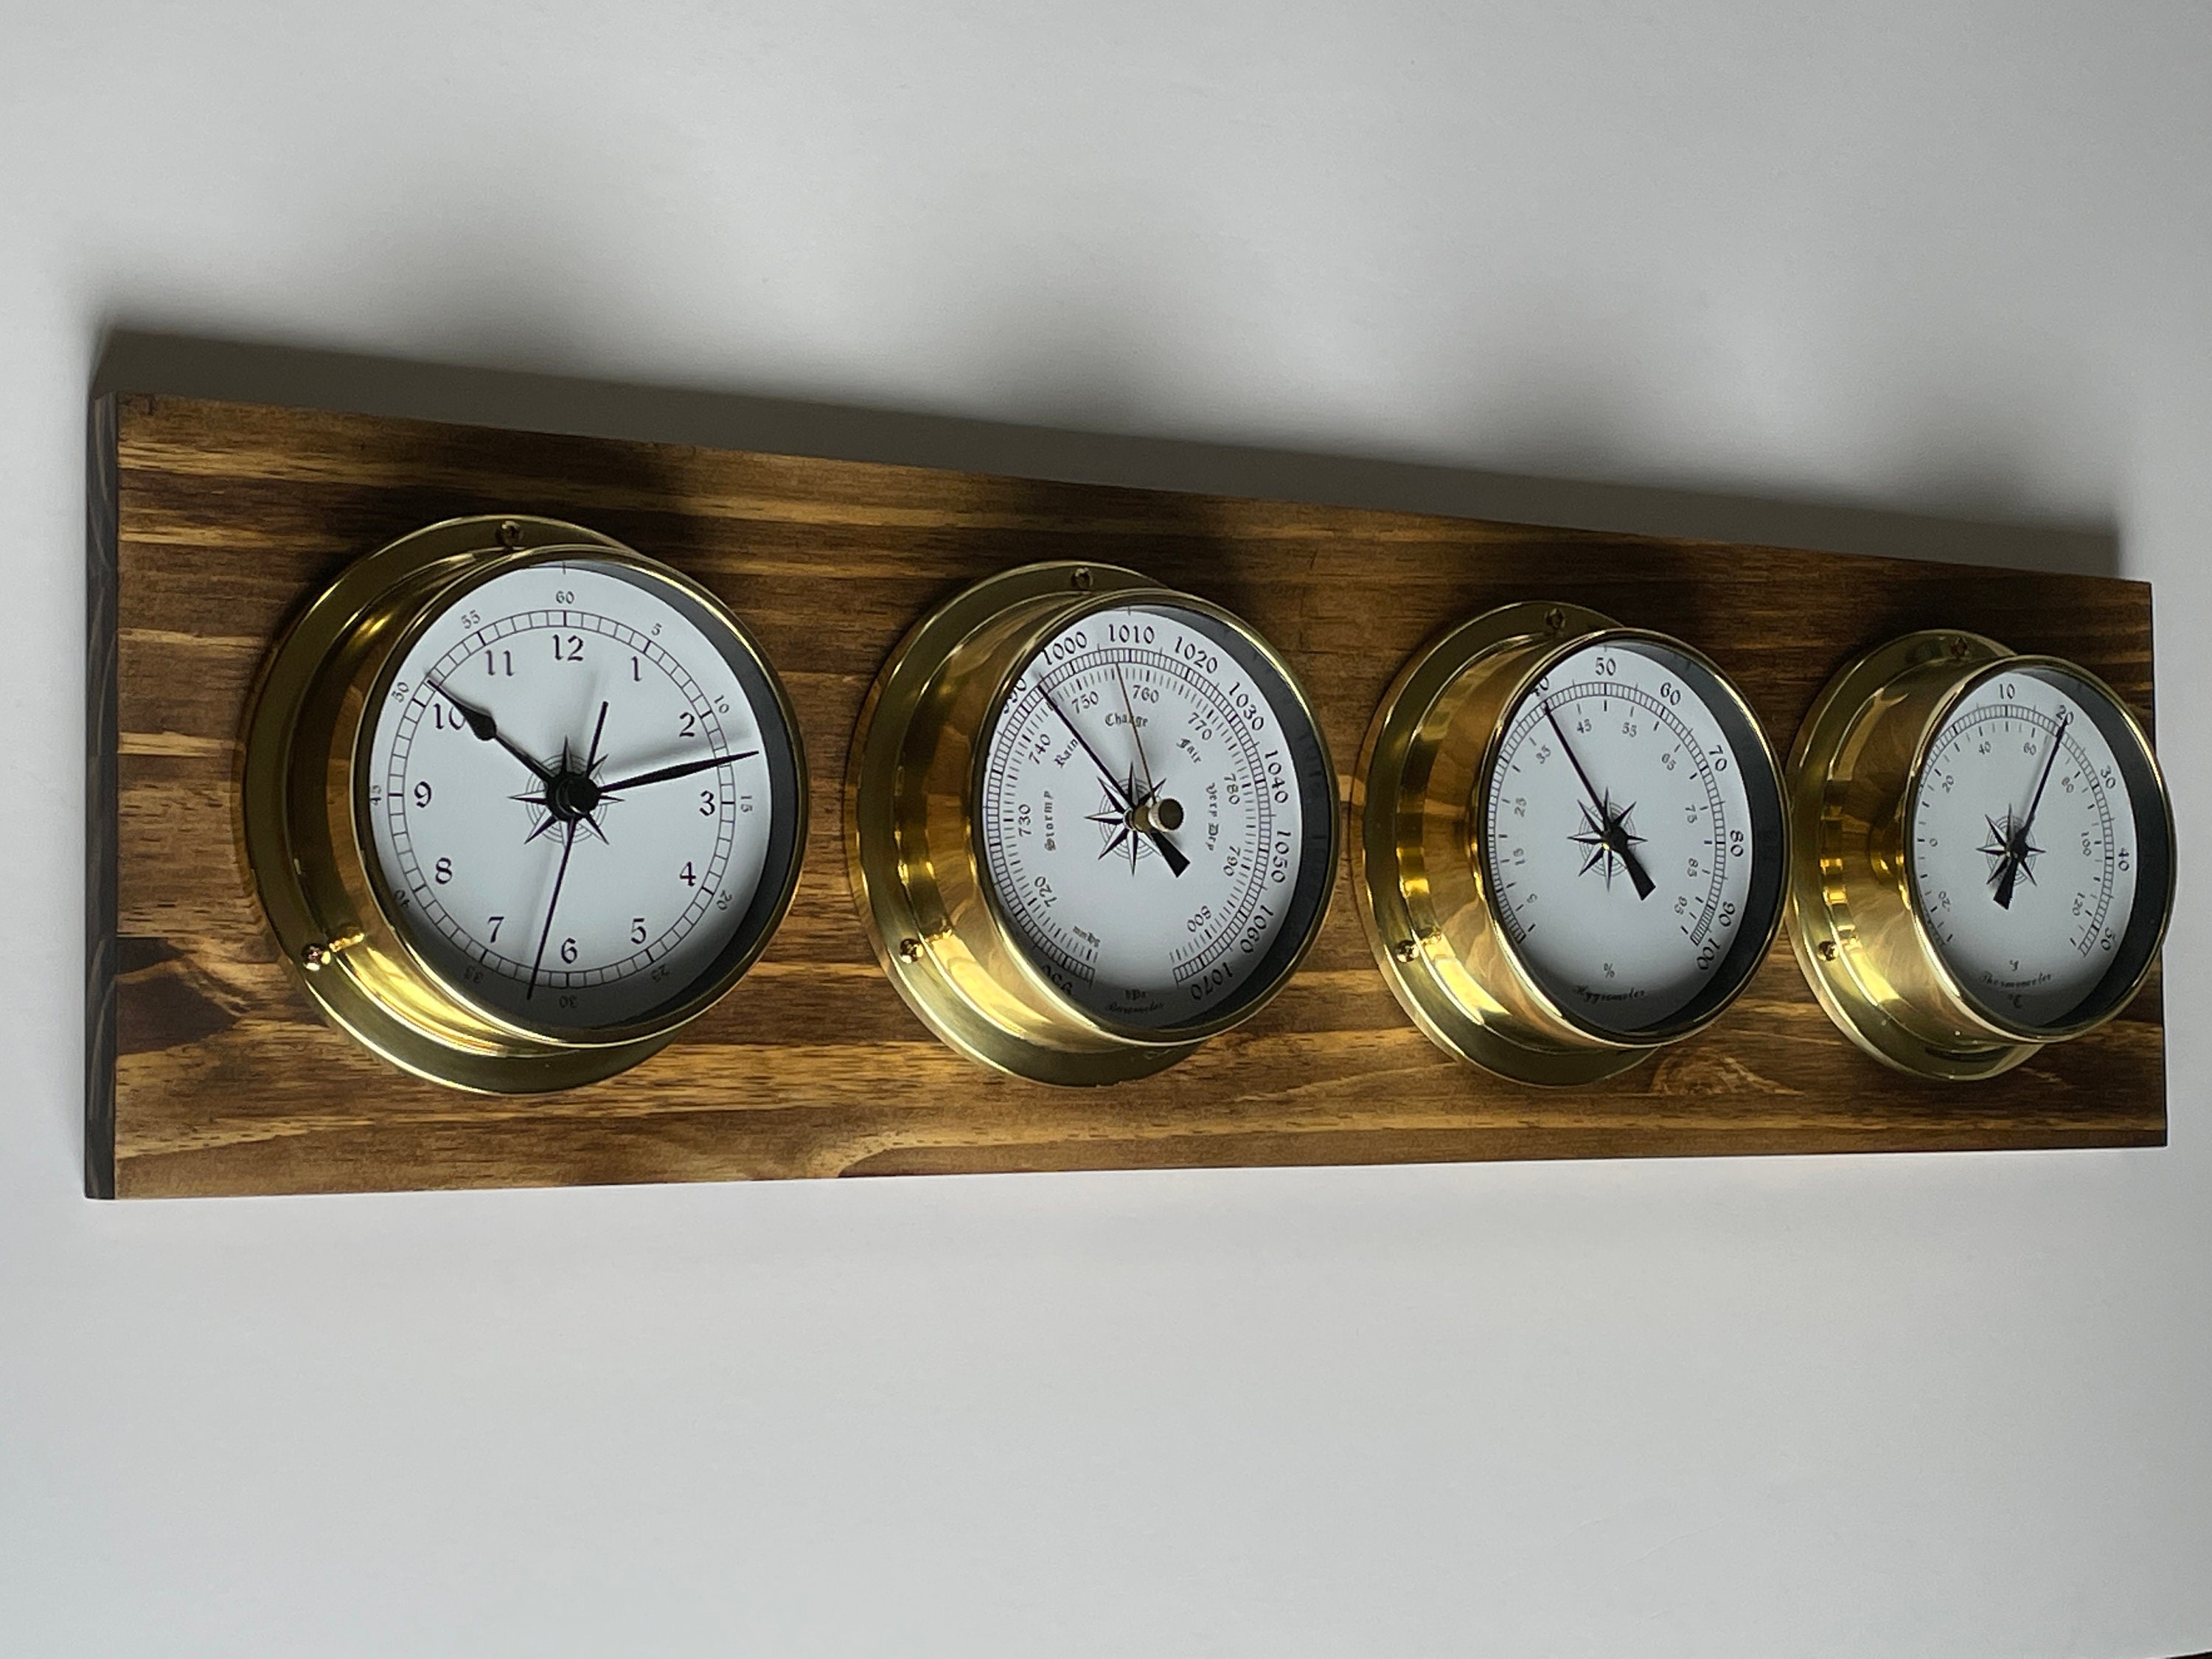 Deluxe Clock, Barometer, Thermometer and Hygrometer Weather Station